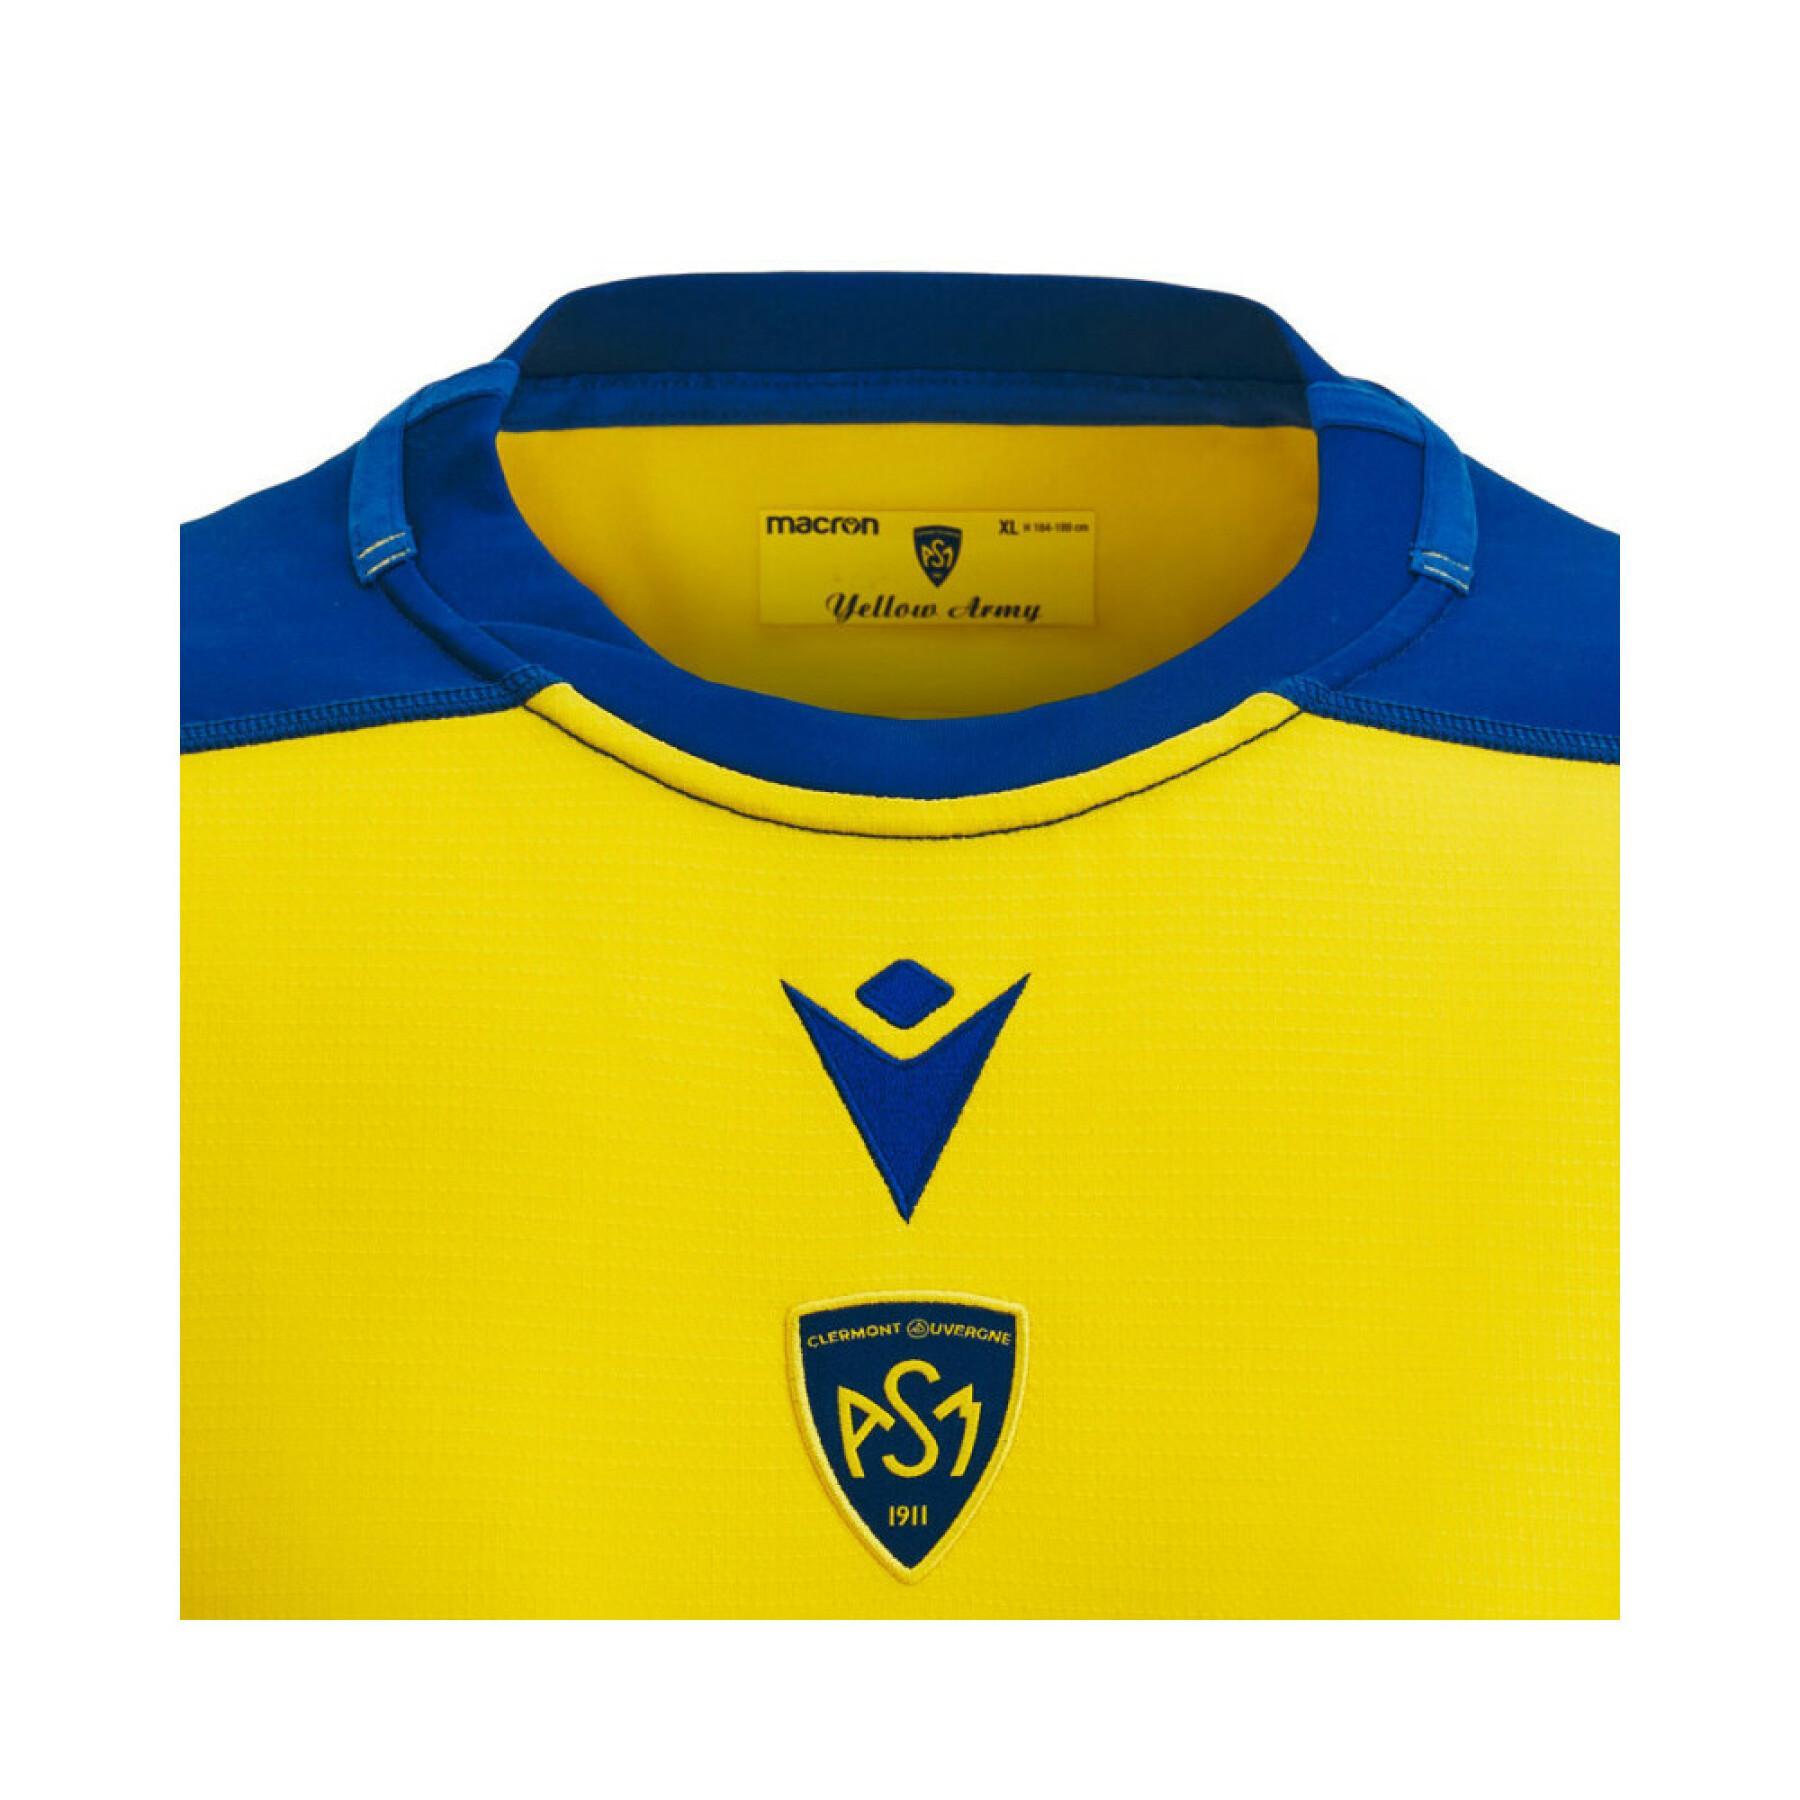 Clermont Auvergne home jersey 2022/23